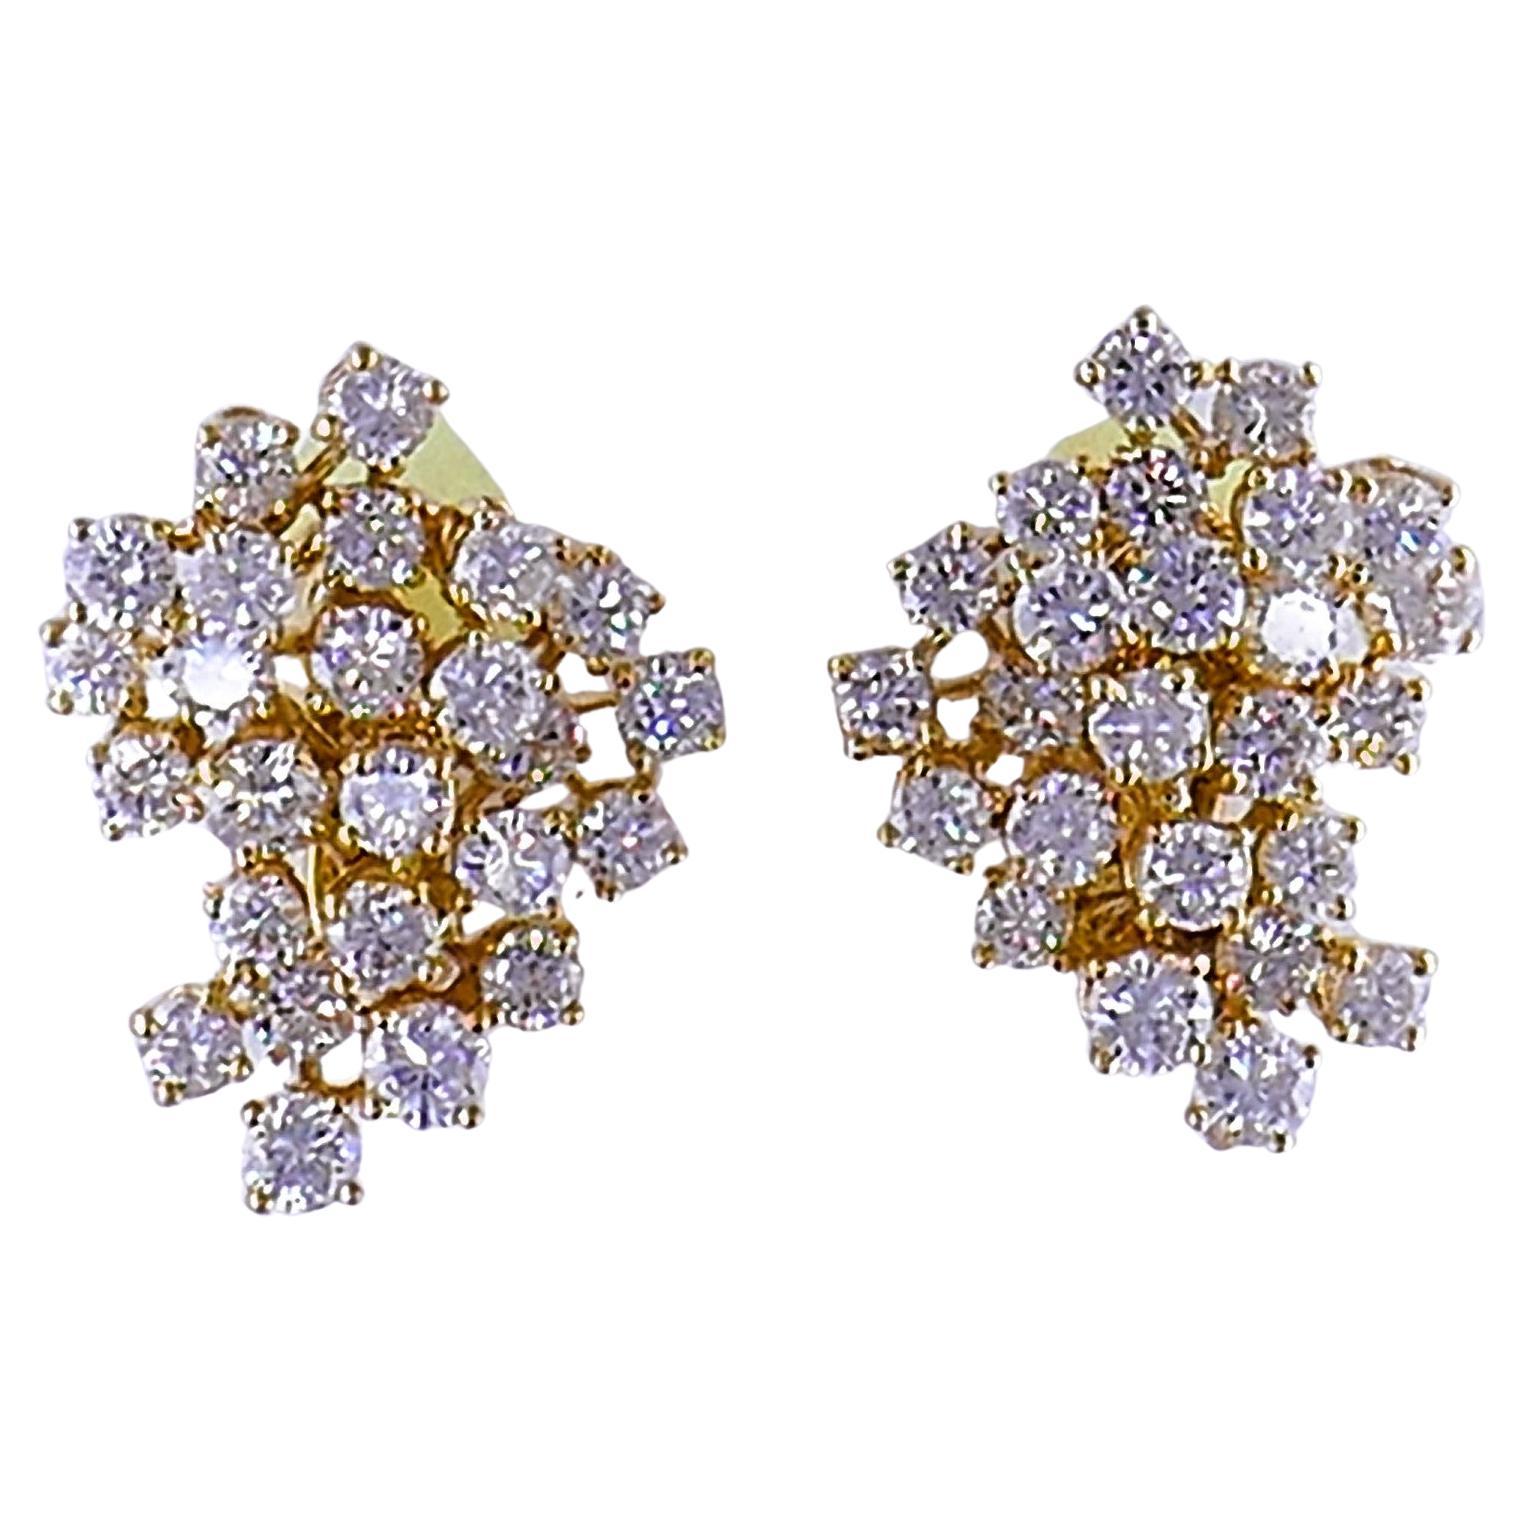 Vintage Chaumet Diamond Day to Night Earrings 18k Gold Estate Jewelry In Good Condition For Sale In Beverly Hills, CA